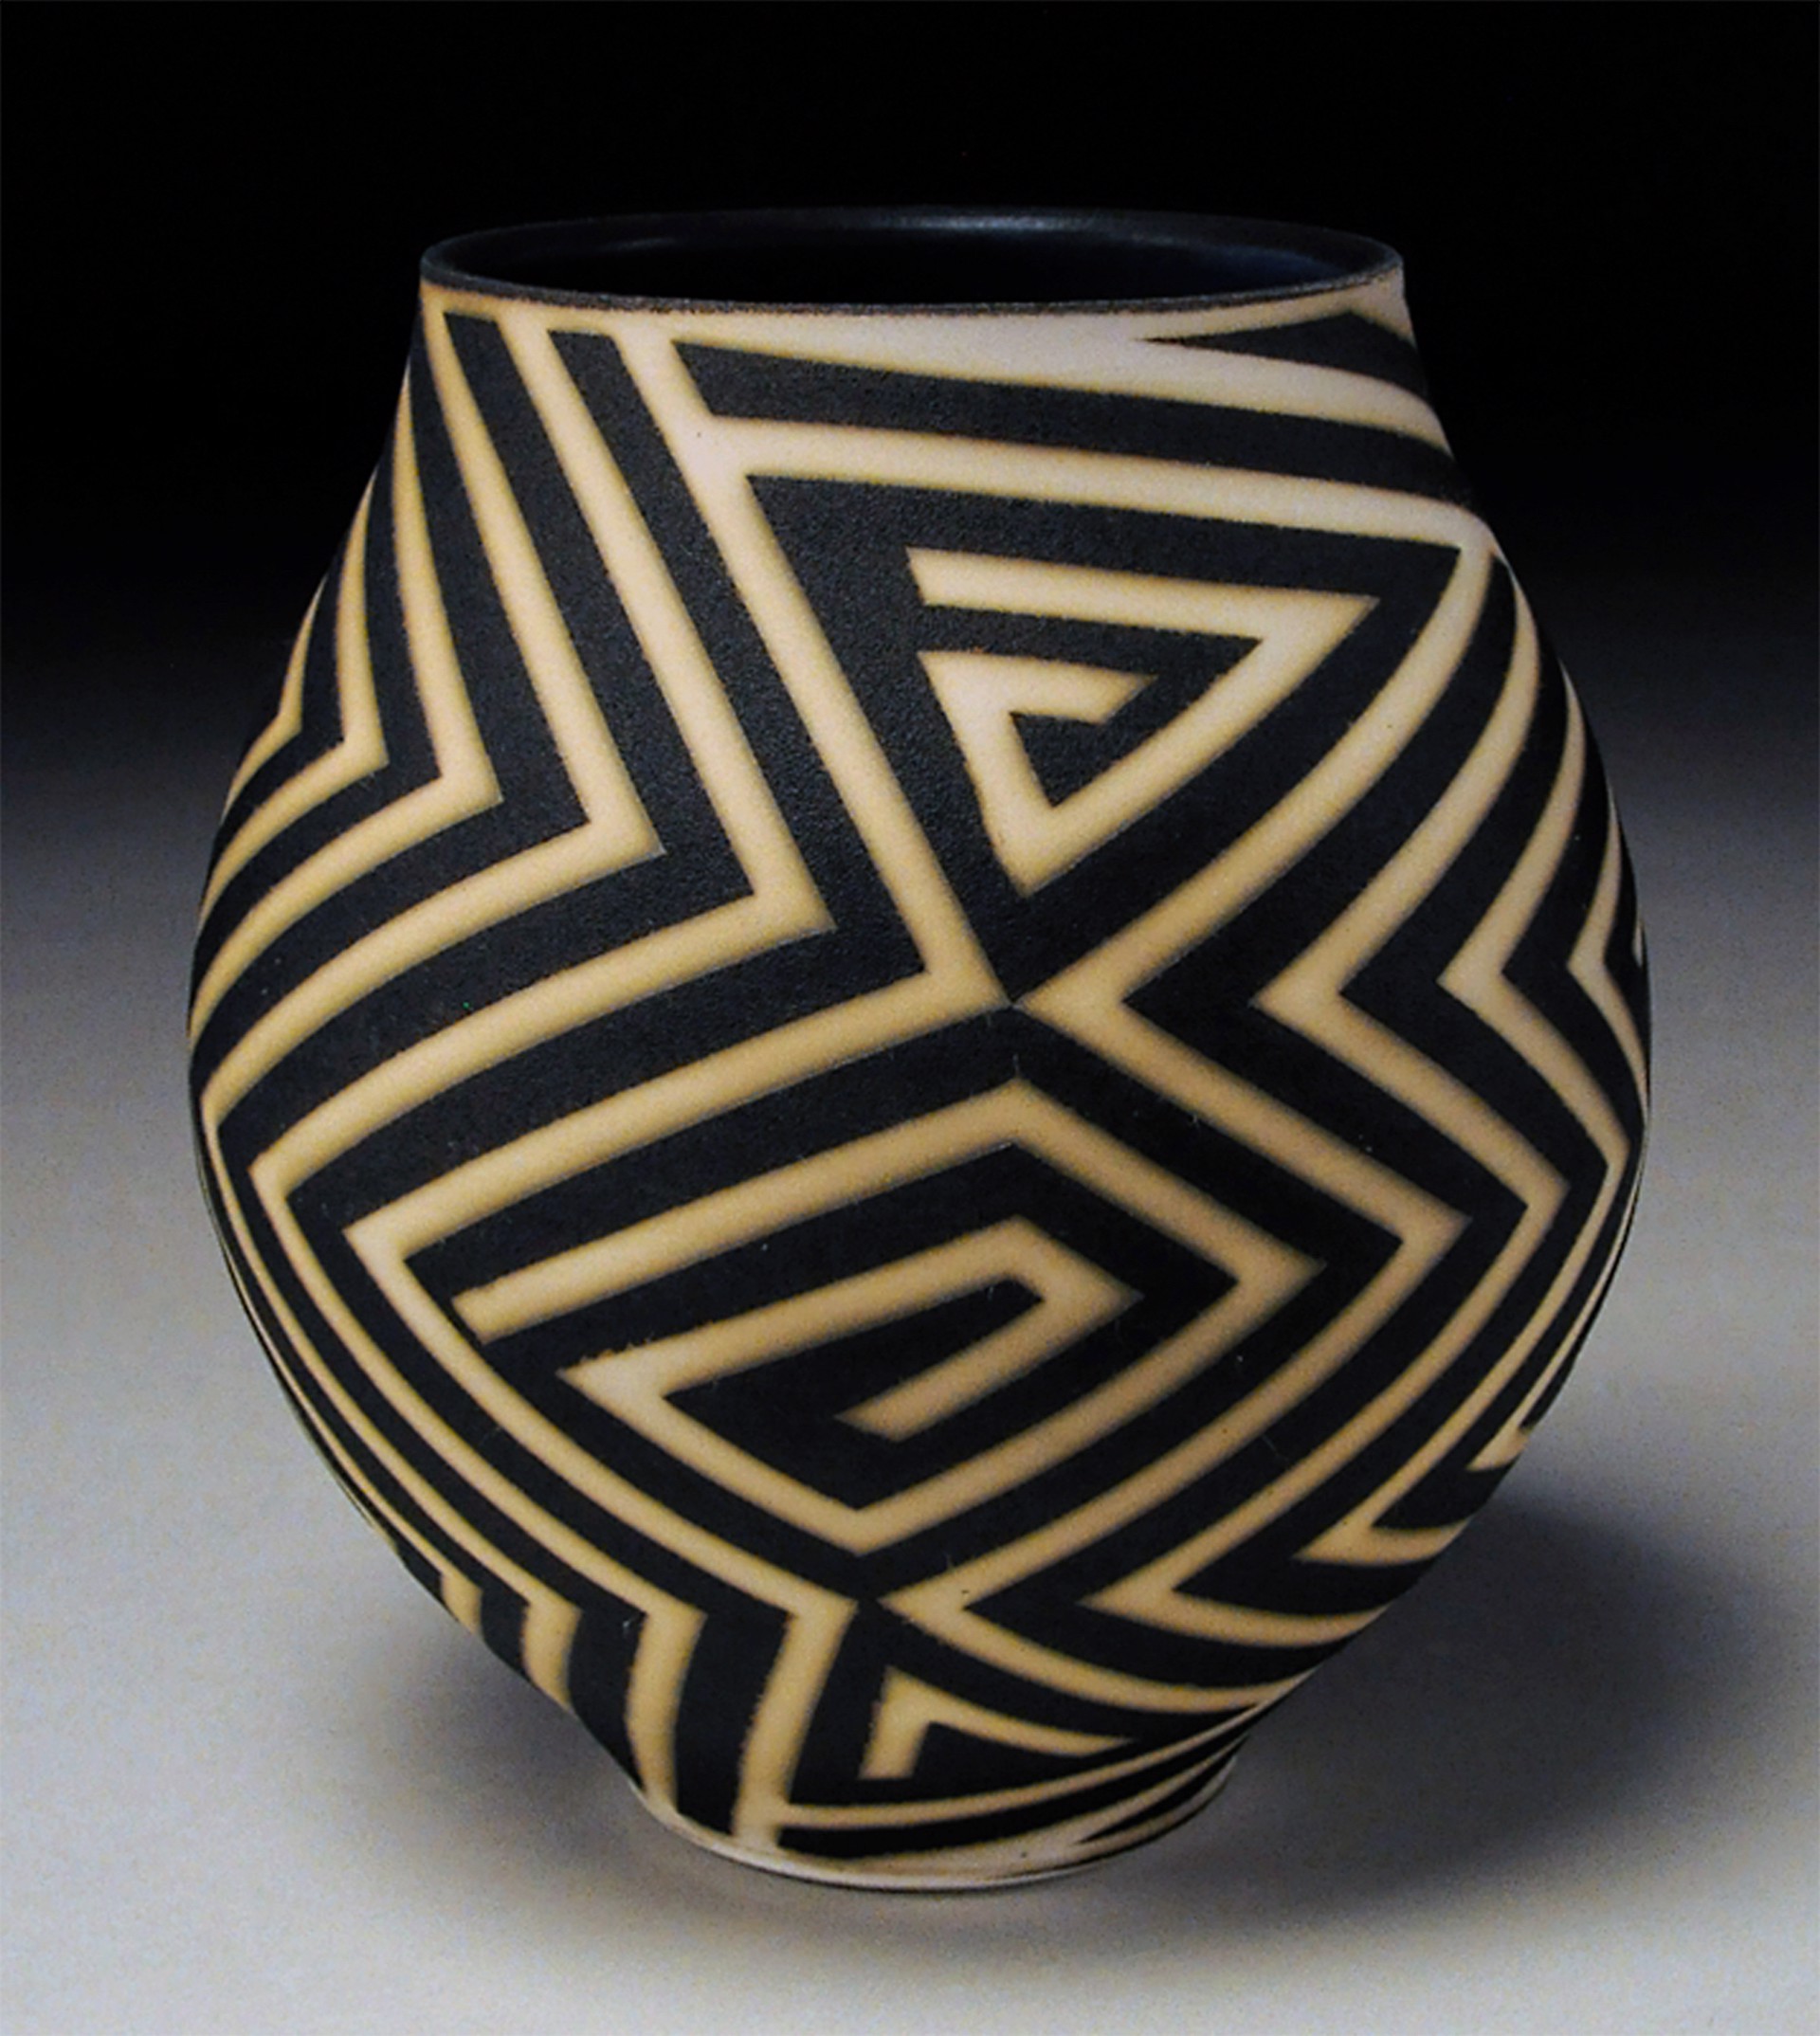 #16- Urn with Stripes and Mazes by N B